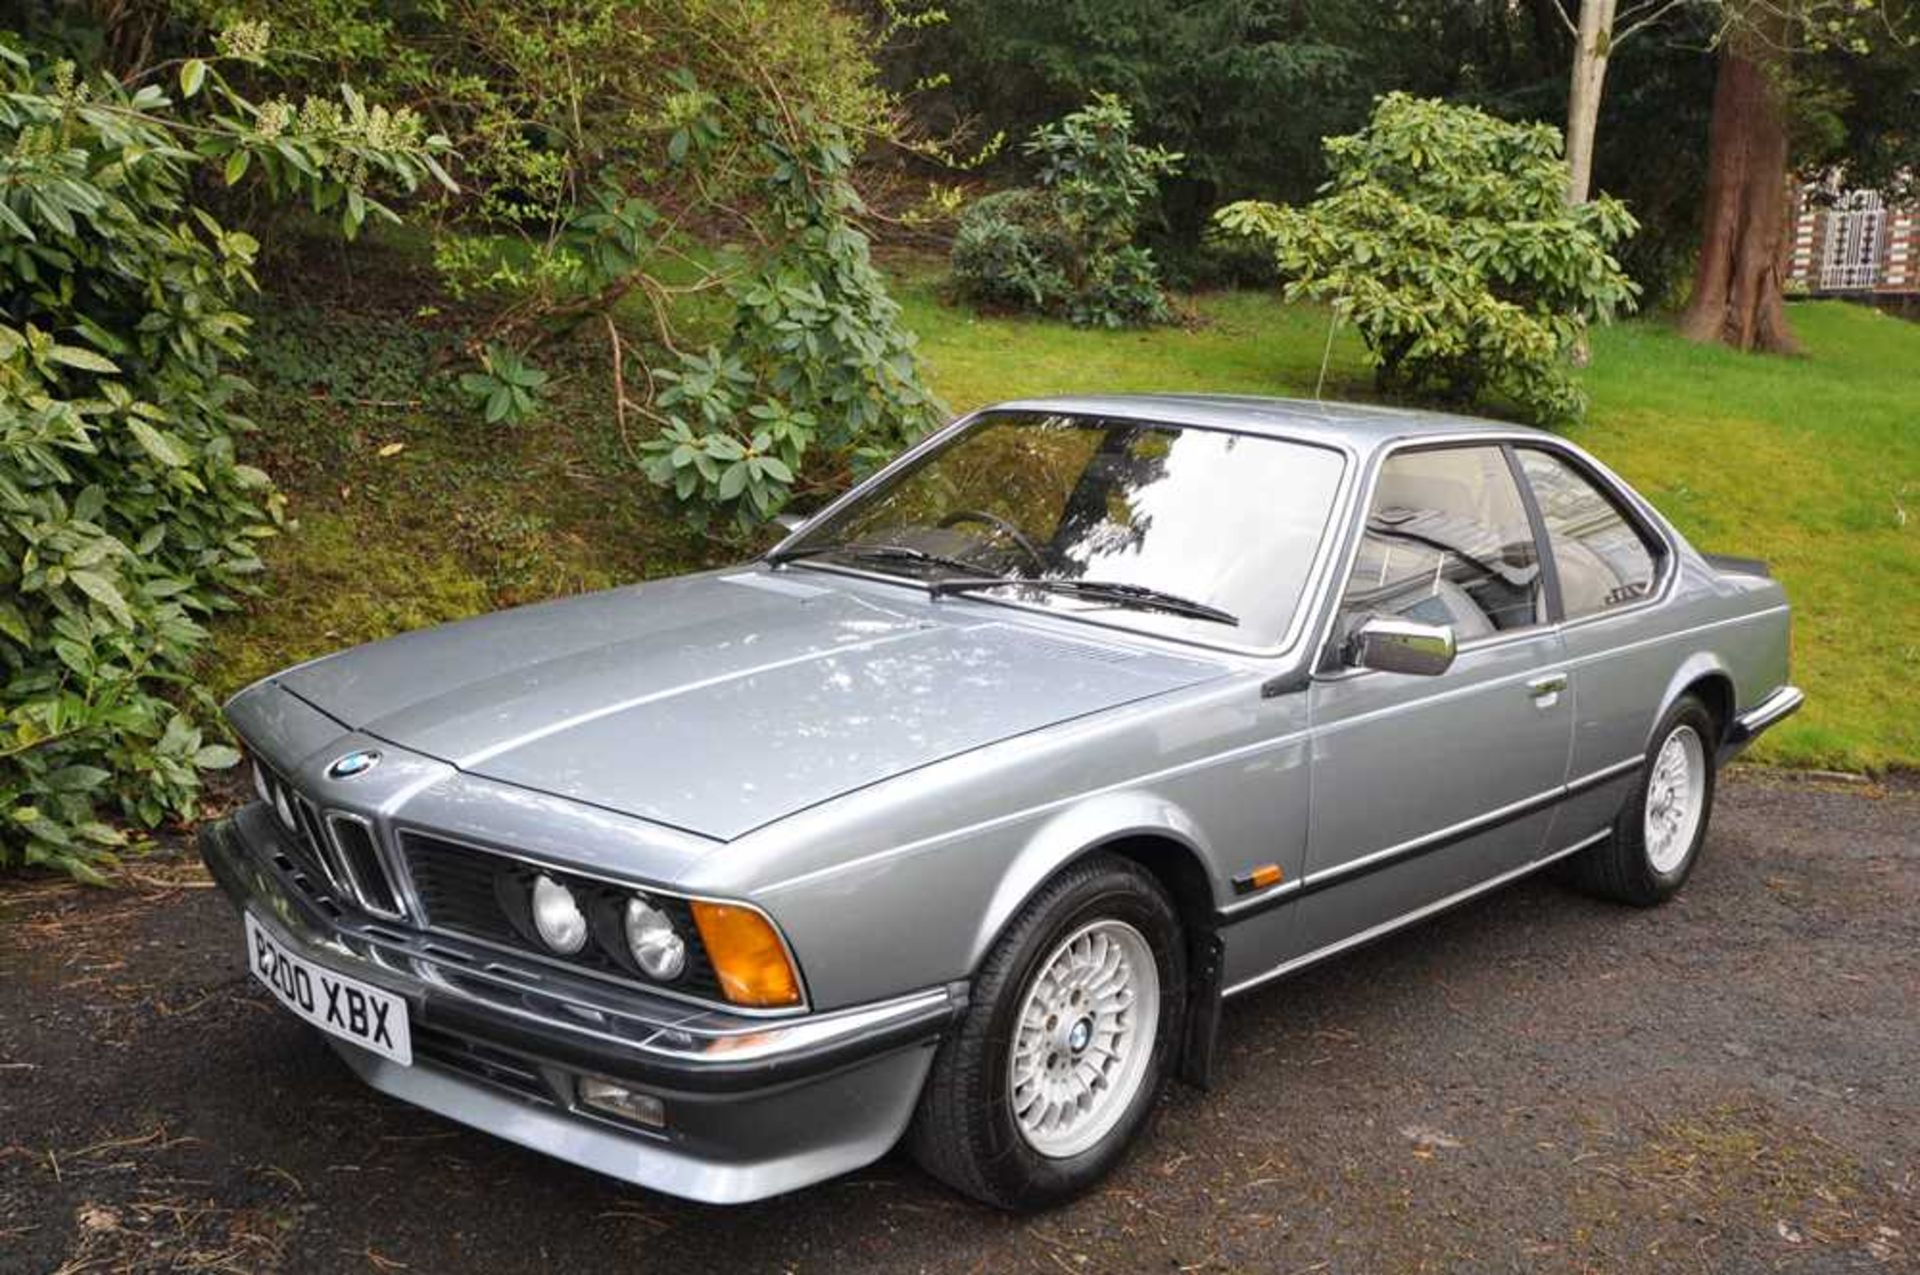 1985 BMW 635CSi Only 54,000 miles and One Owner From New - Image 4 of 43